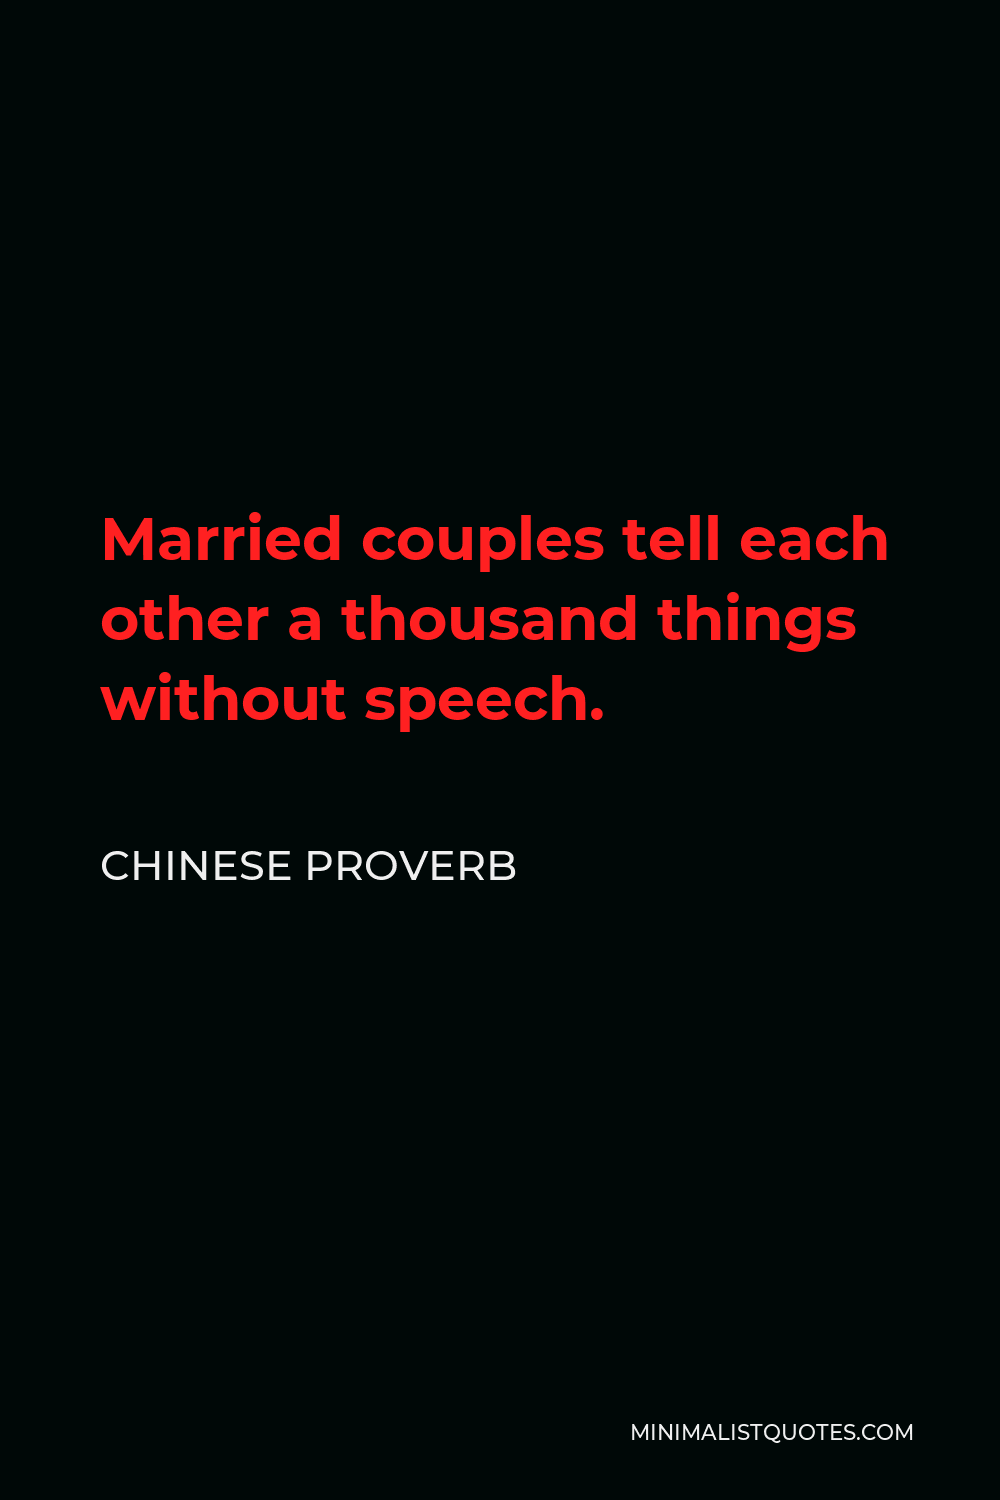 Chinese Proverb Quote - Married couples tell each other a thousand things without speech.